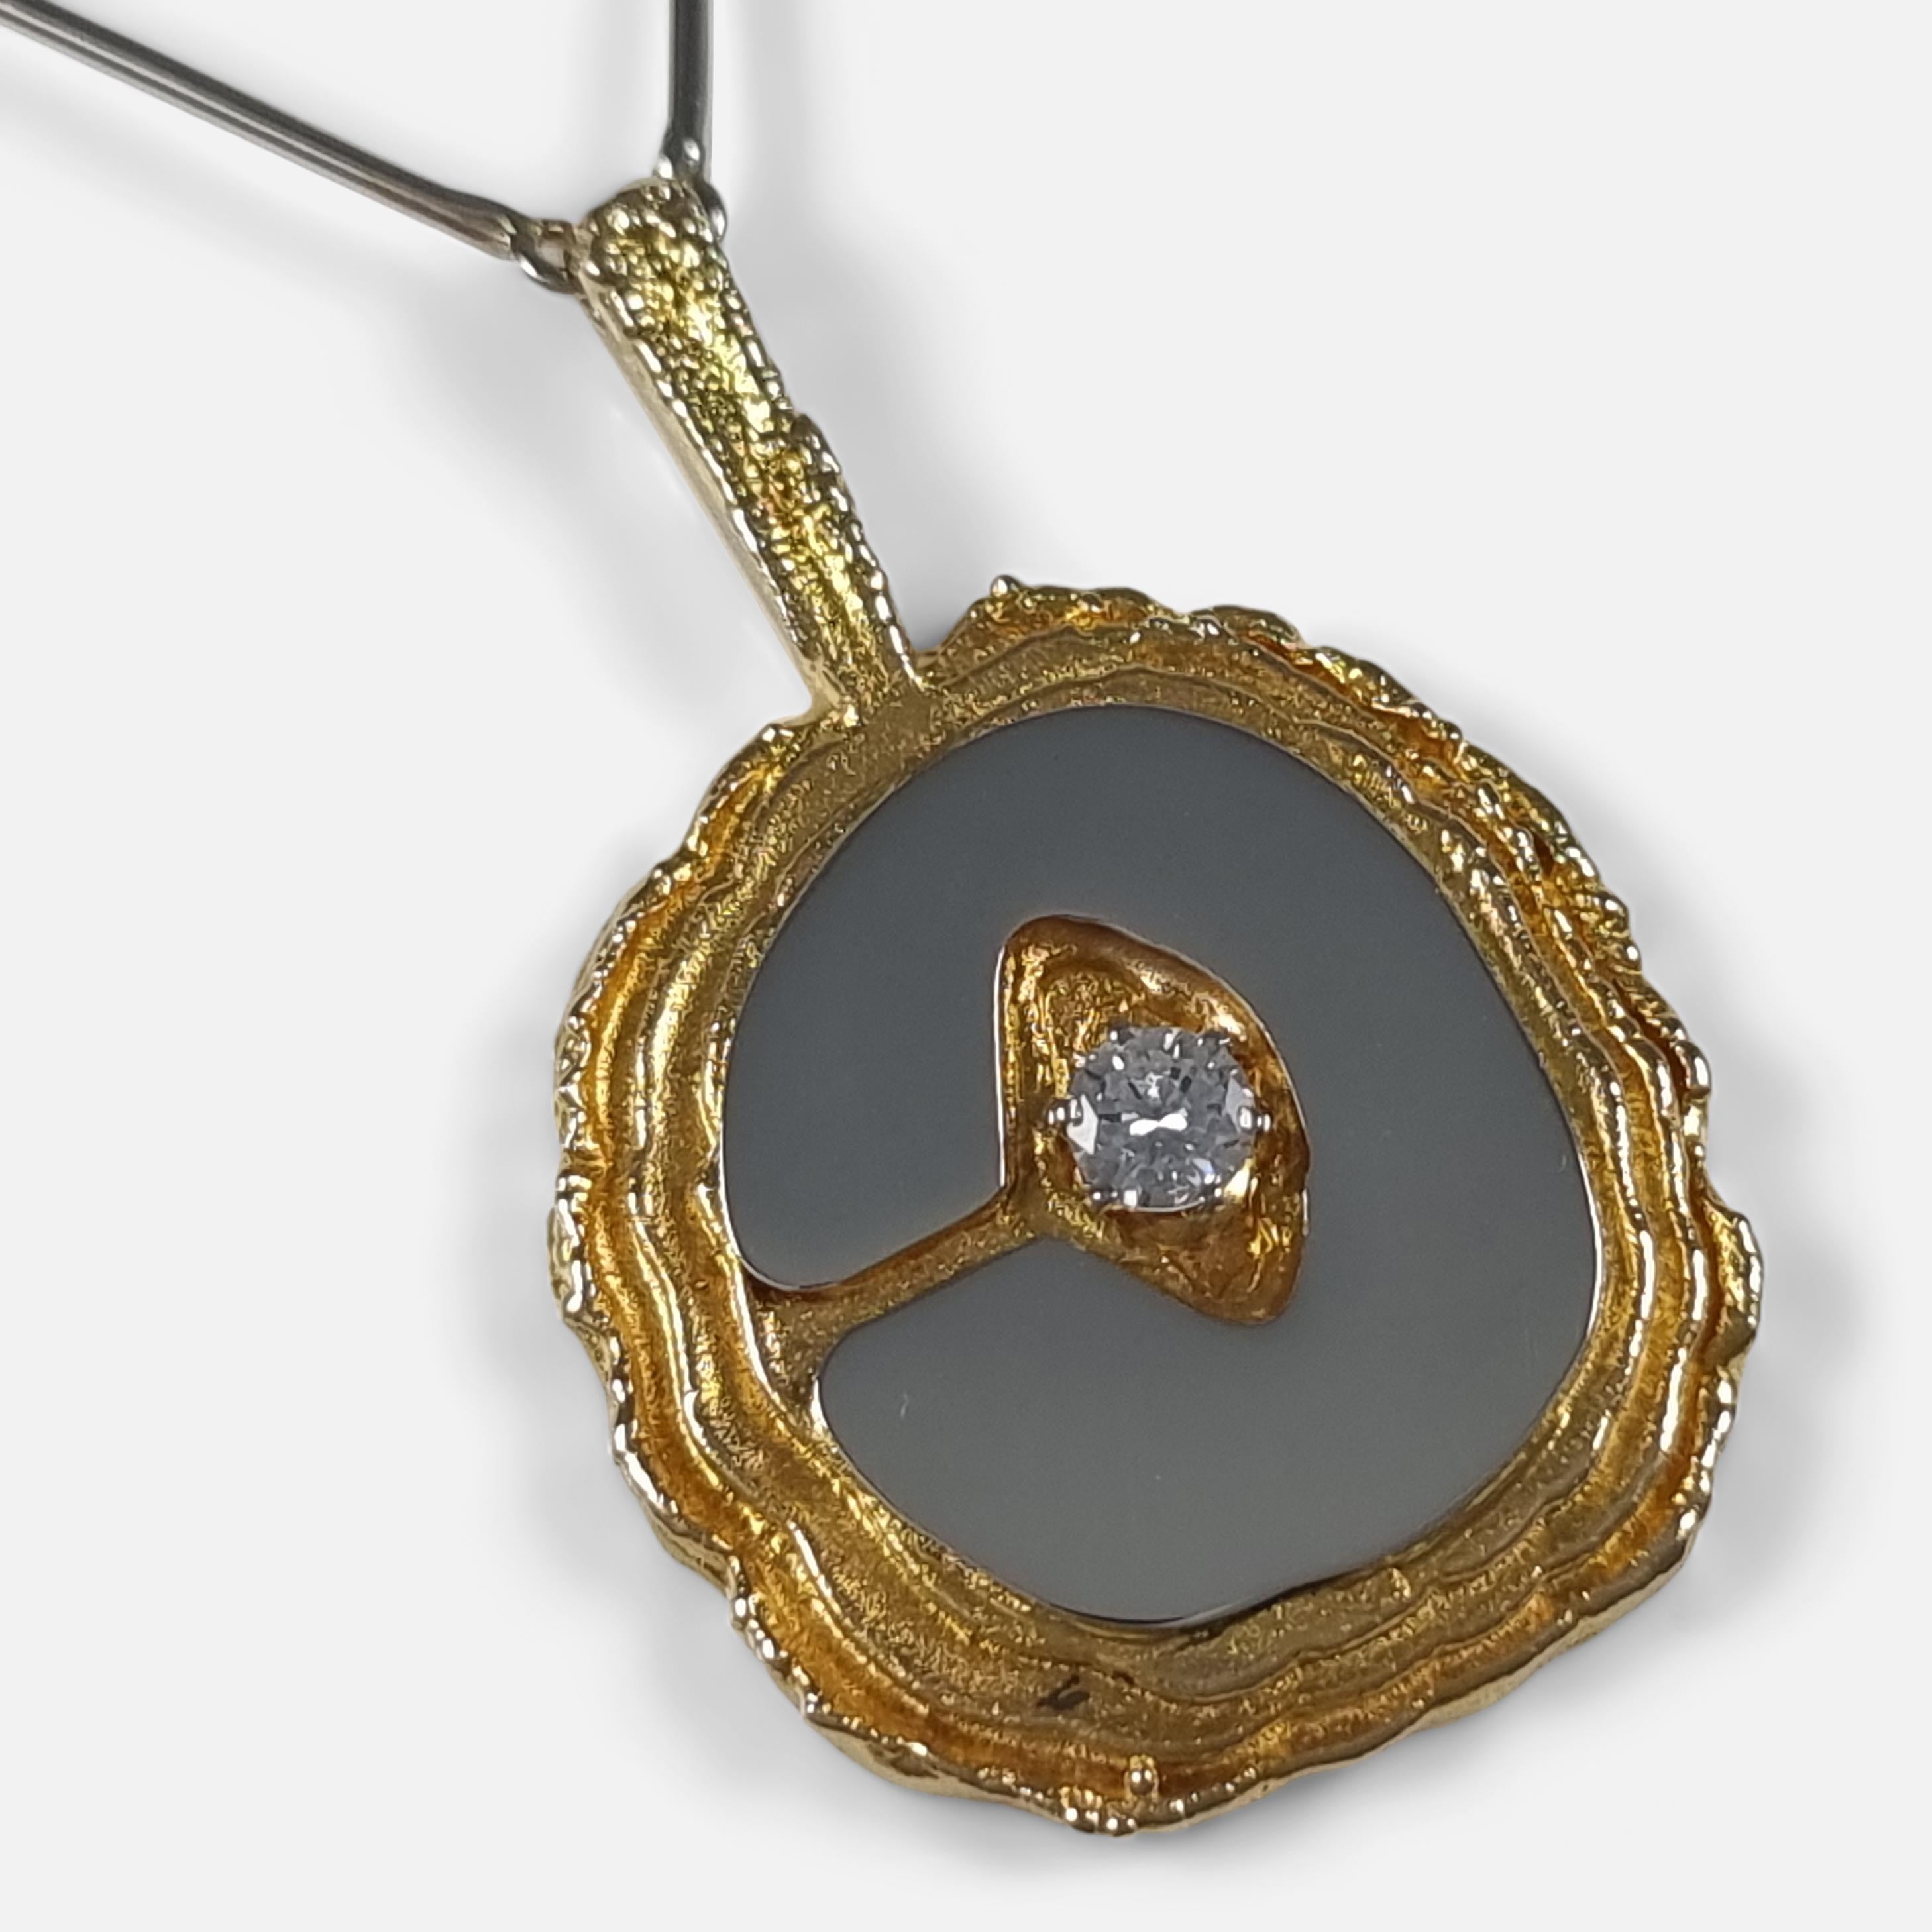 A 18ct yellow and white gold 0.19ct diamond 'Legato' pendant necklace designed by Juhani Linnovaara for Lapponia.

Hallmarked with the Lapponia makers mark, Common Control Mark '750' to denote 18 carat gold, Finnish nation mark, and date code 'Z7'